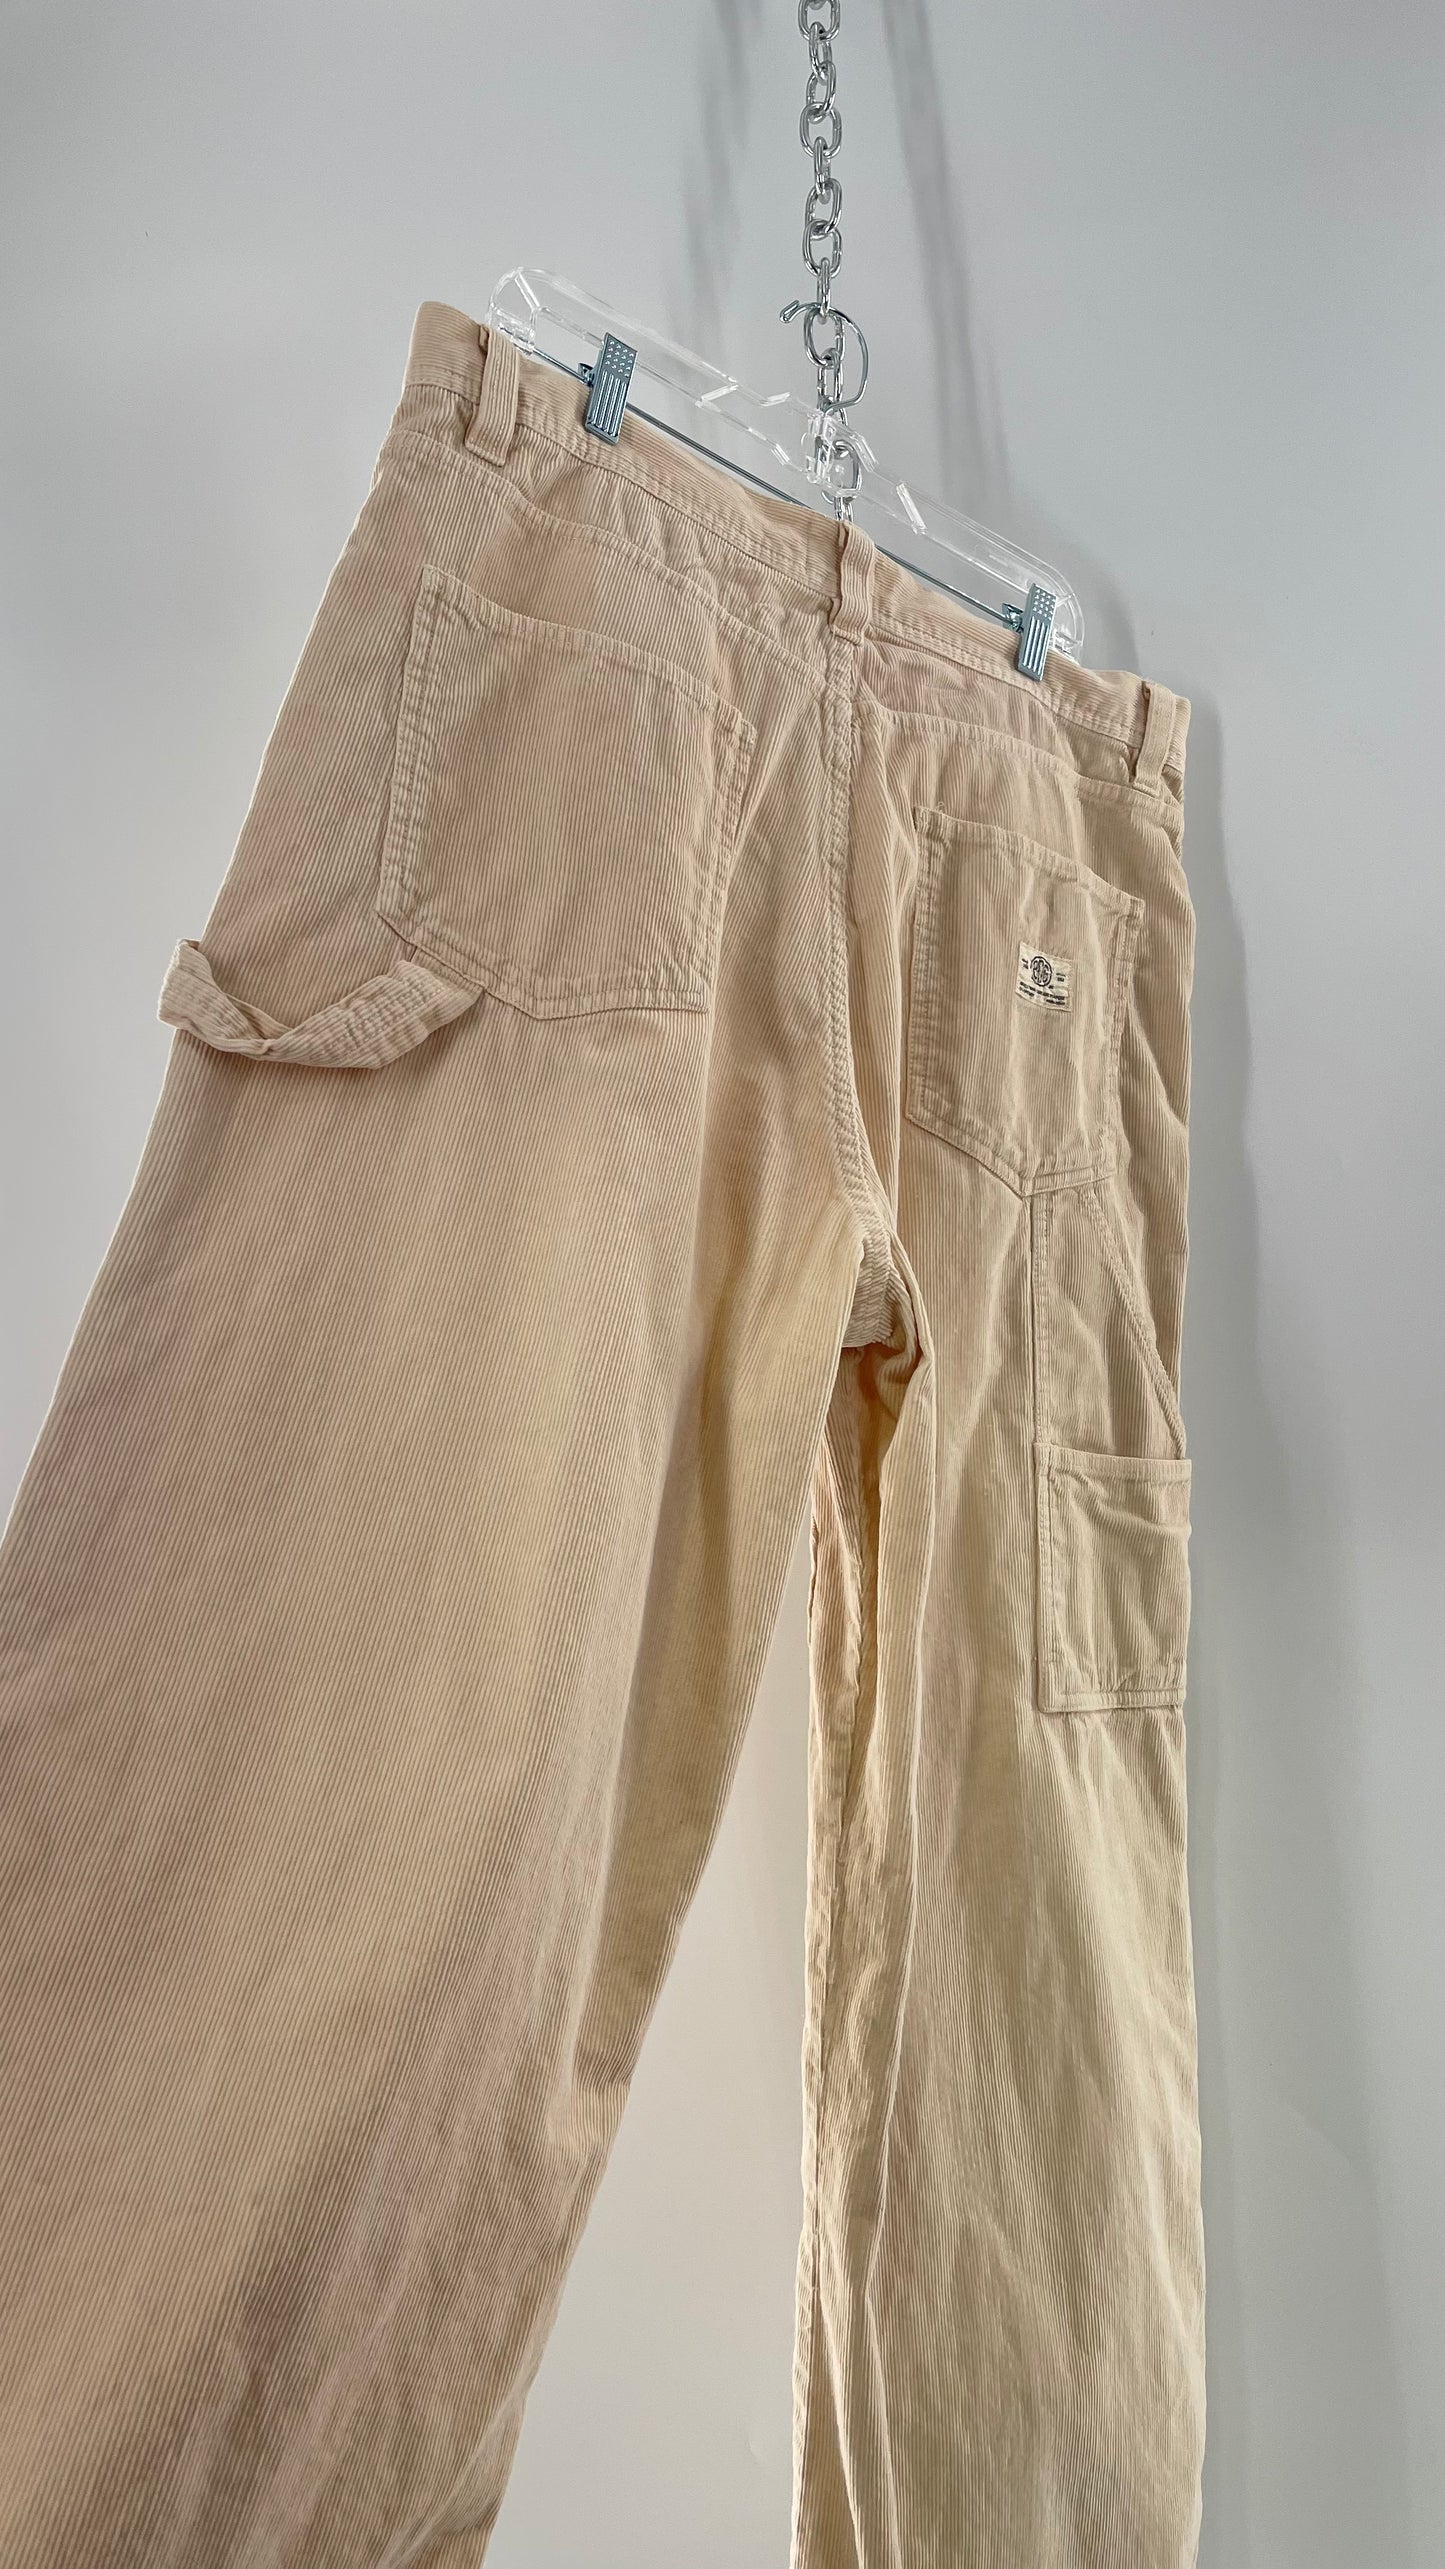 Urban Outfitters BDG Beige Corduroy Cargos with Leg Patches (36)